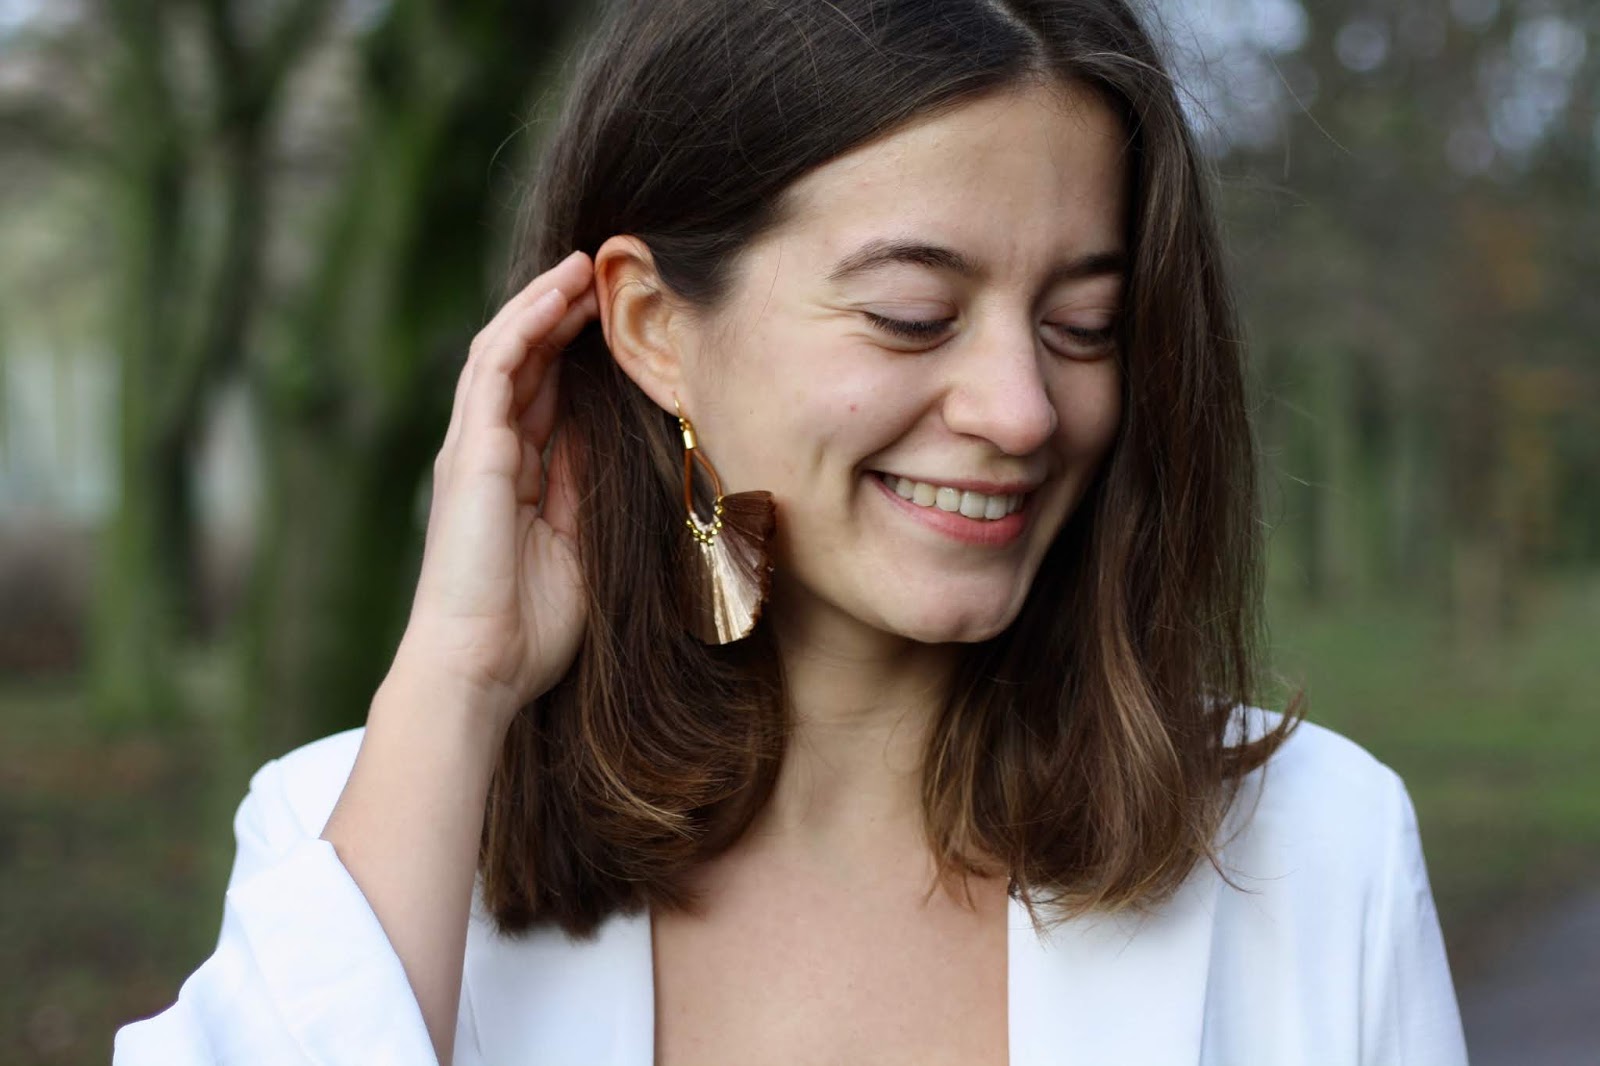 abbey, smiling, brushes her hair behind her ear, showing off taupe tassel earrings